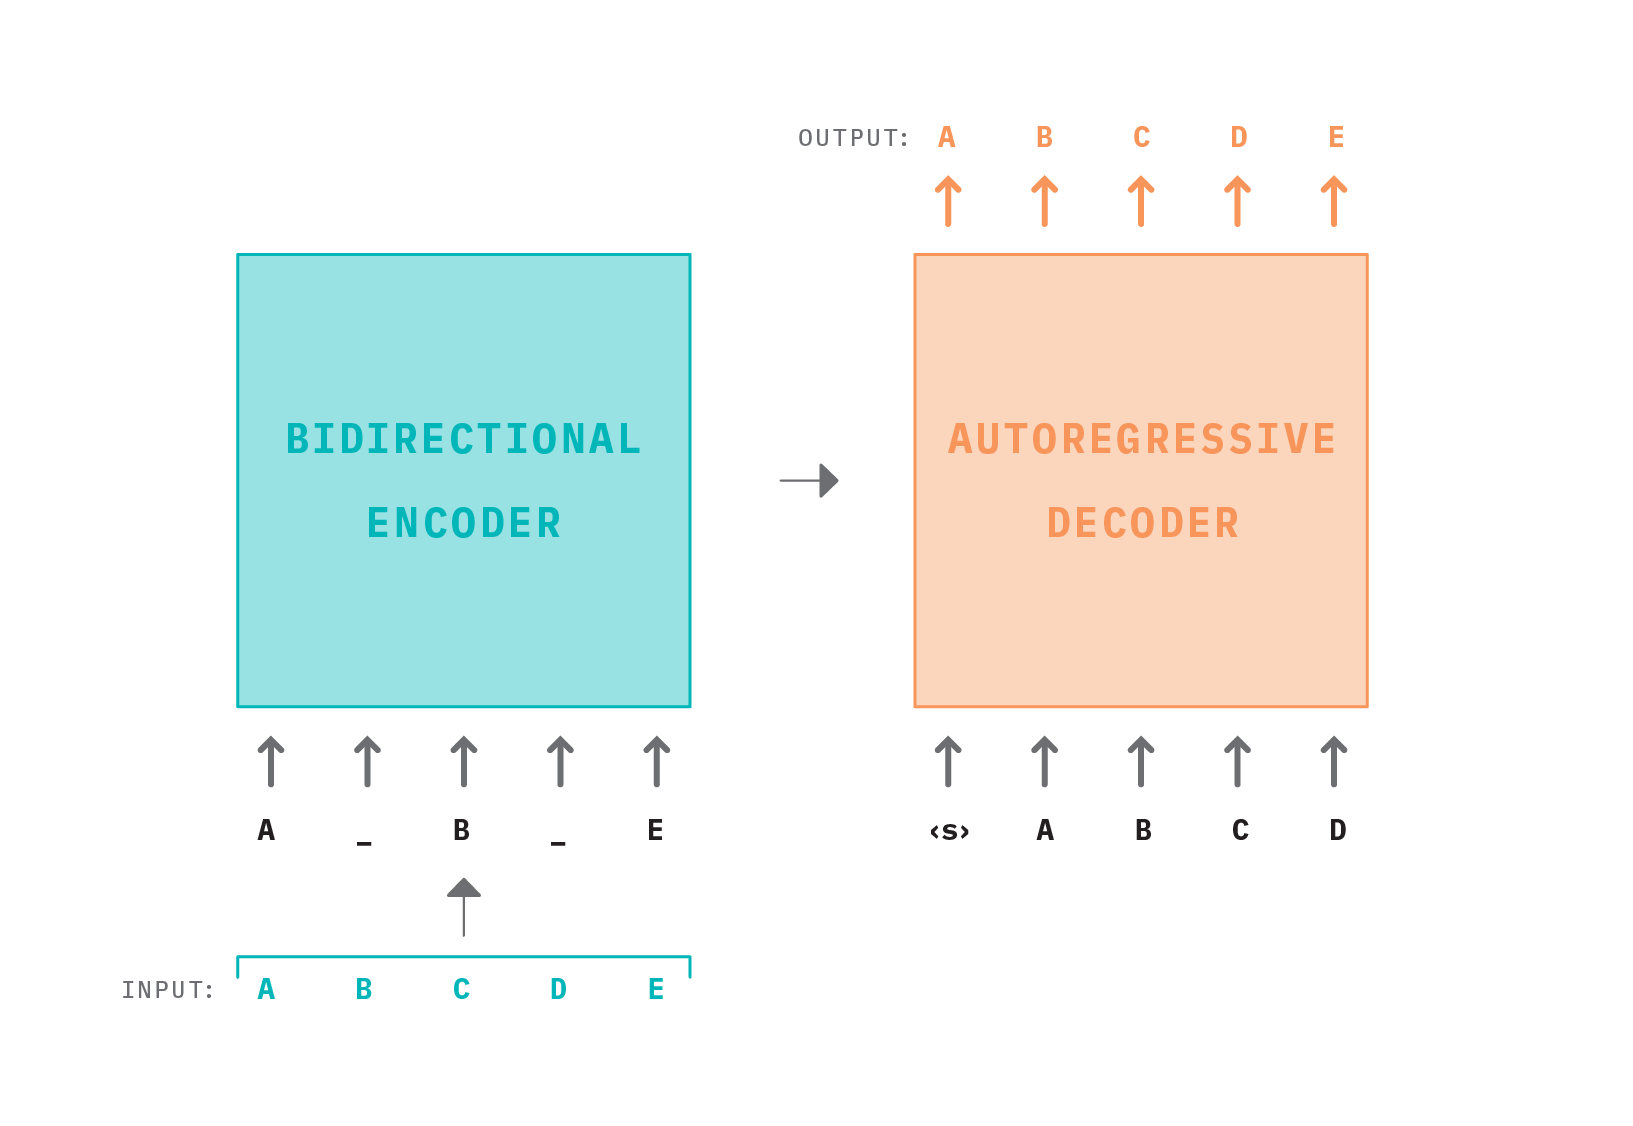 Figure 10: BART is implemented with a bidirectional encoder over corrupted text and a left-to-right autoregressive decoder that attends to the encoded latent representation to generate an output that minimizes the negative log likelihood of the original input document. Image is adapted from the source paper.